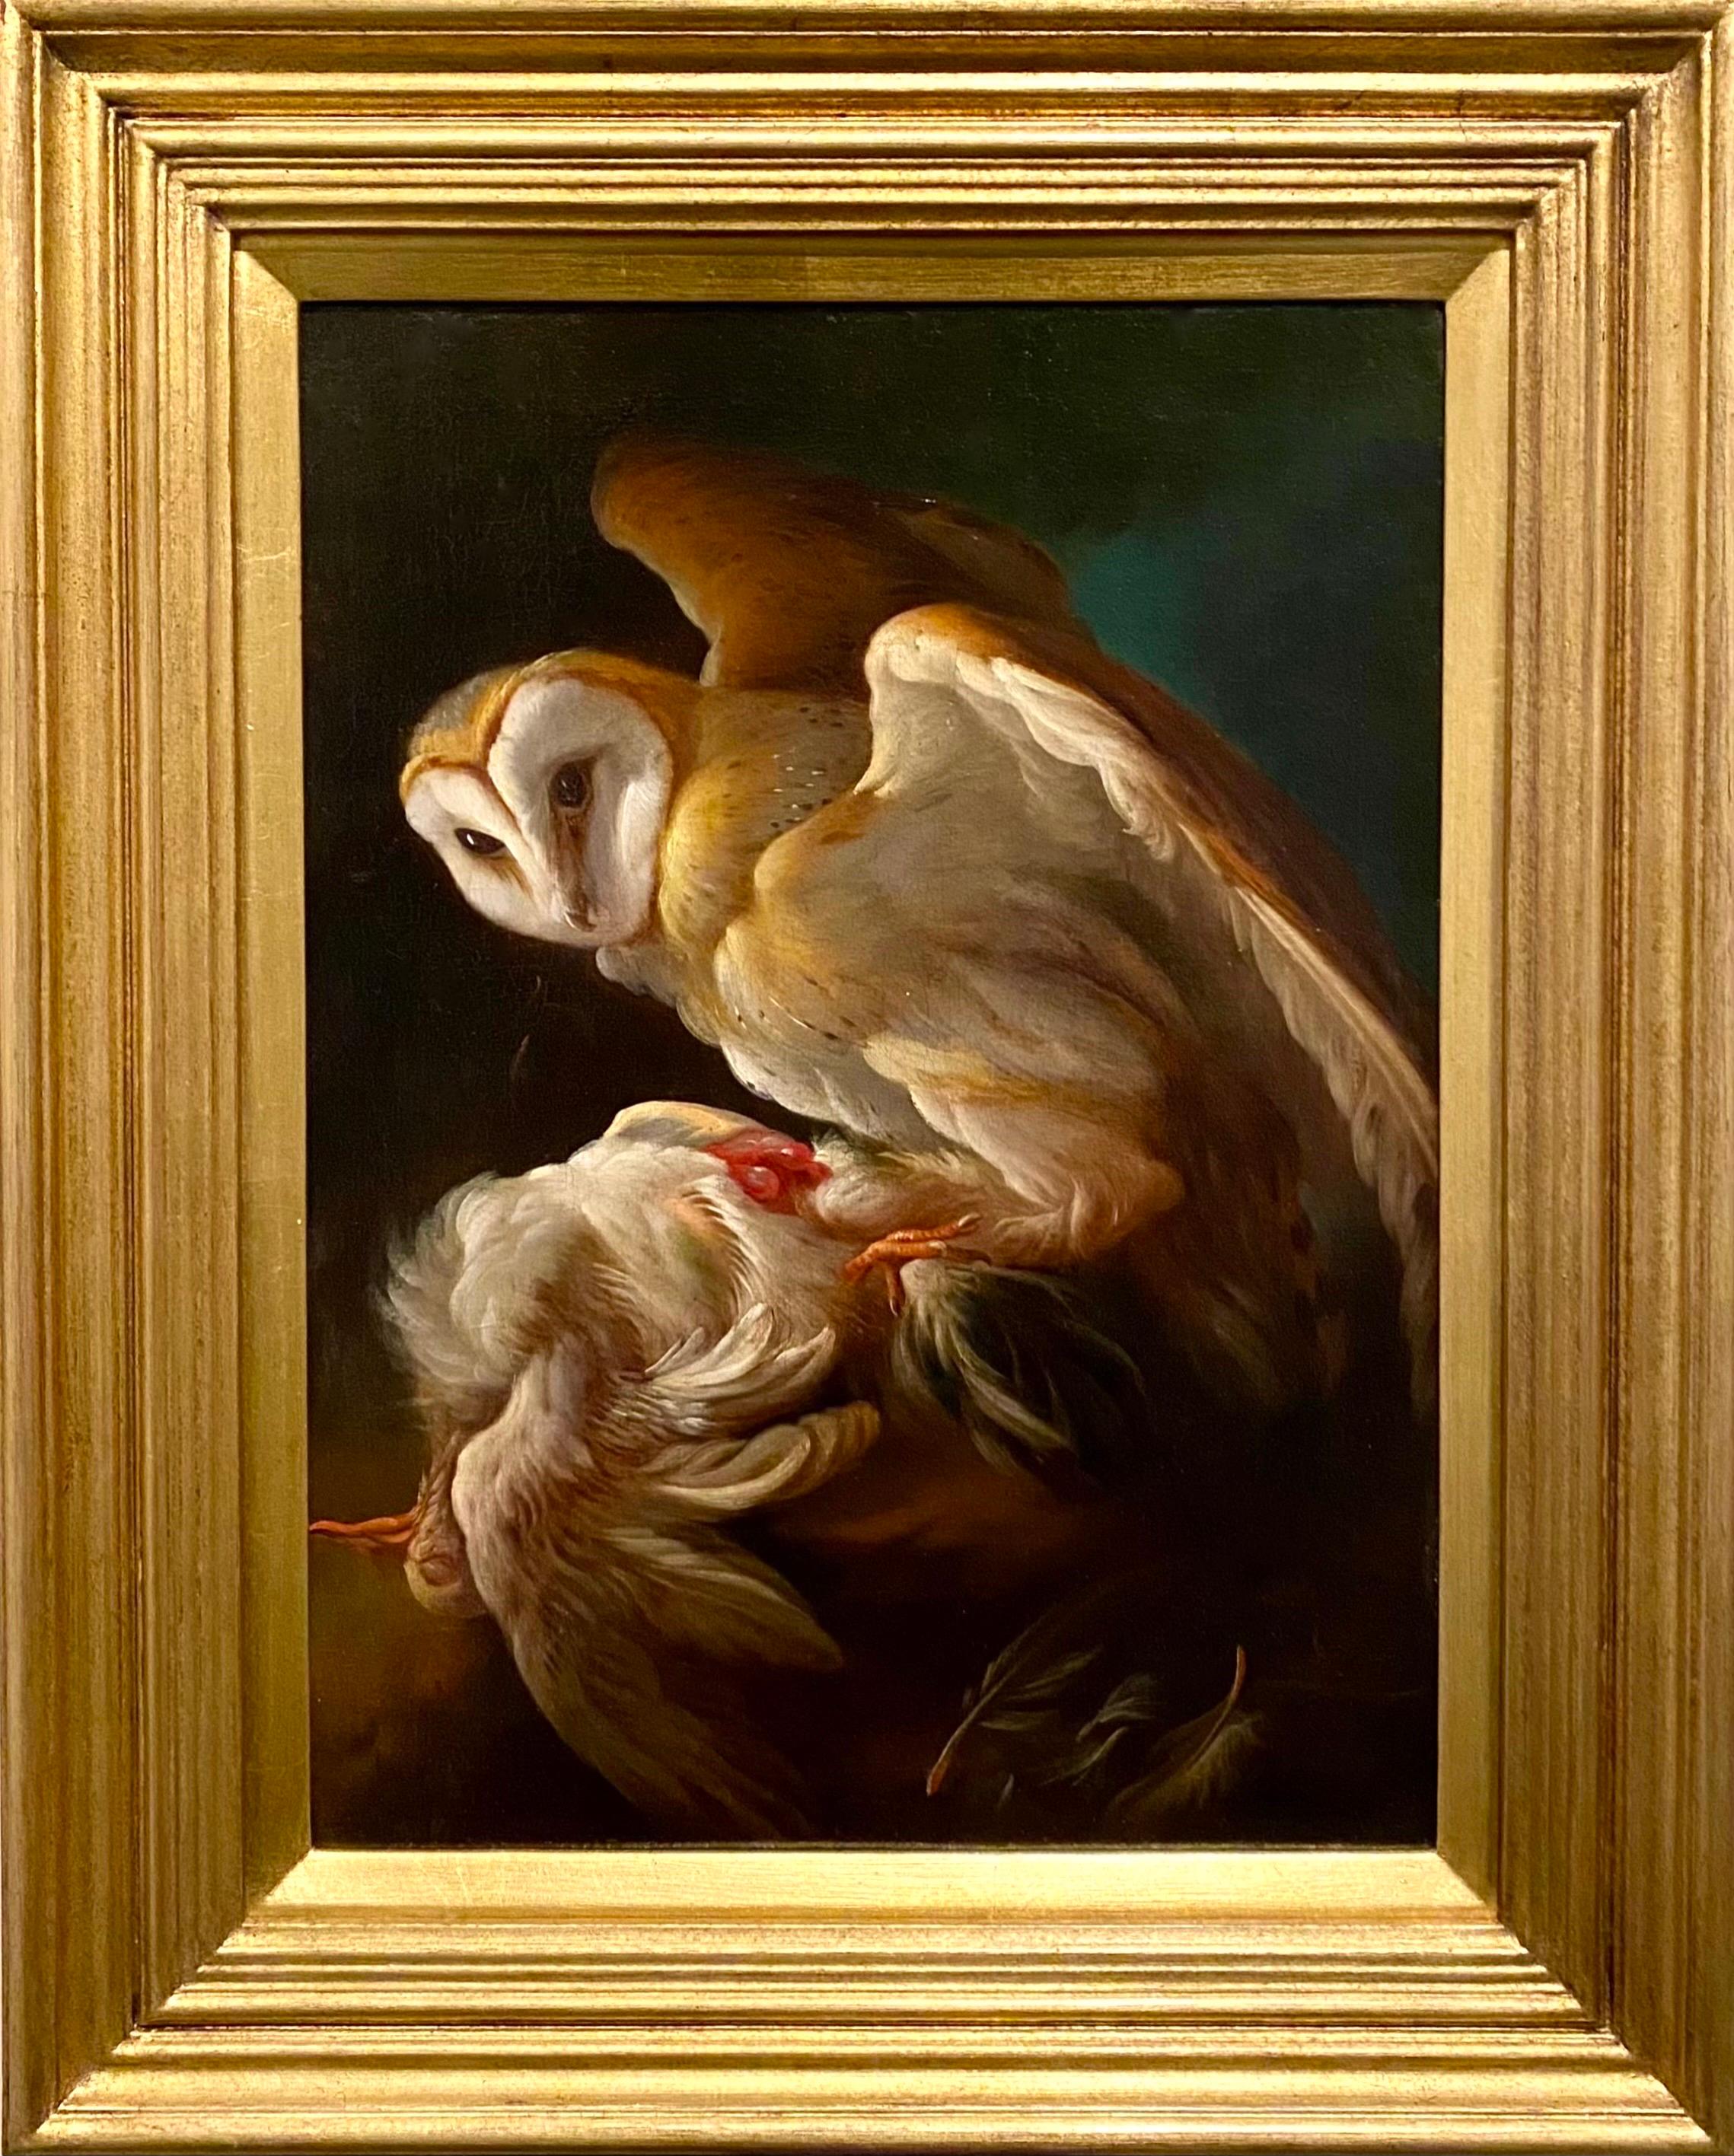 18th century Italian Old Master painting - An Owl with his prey - Bird Hunt